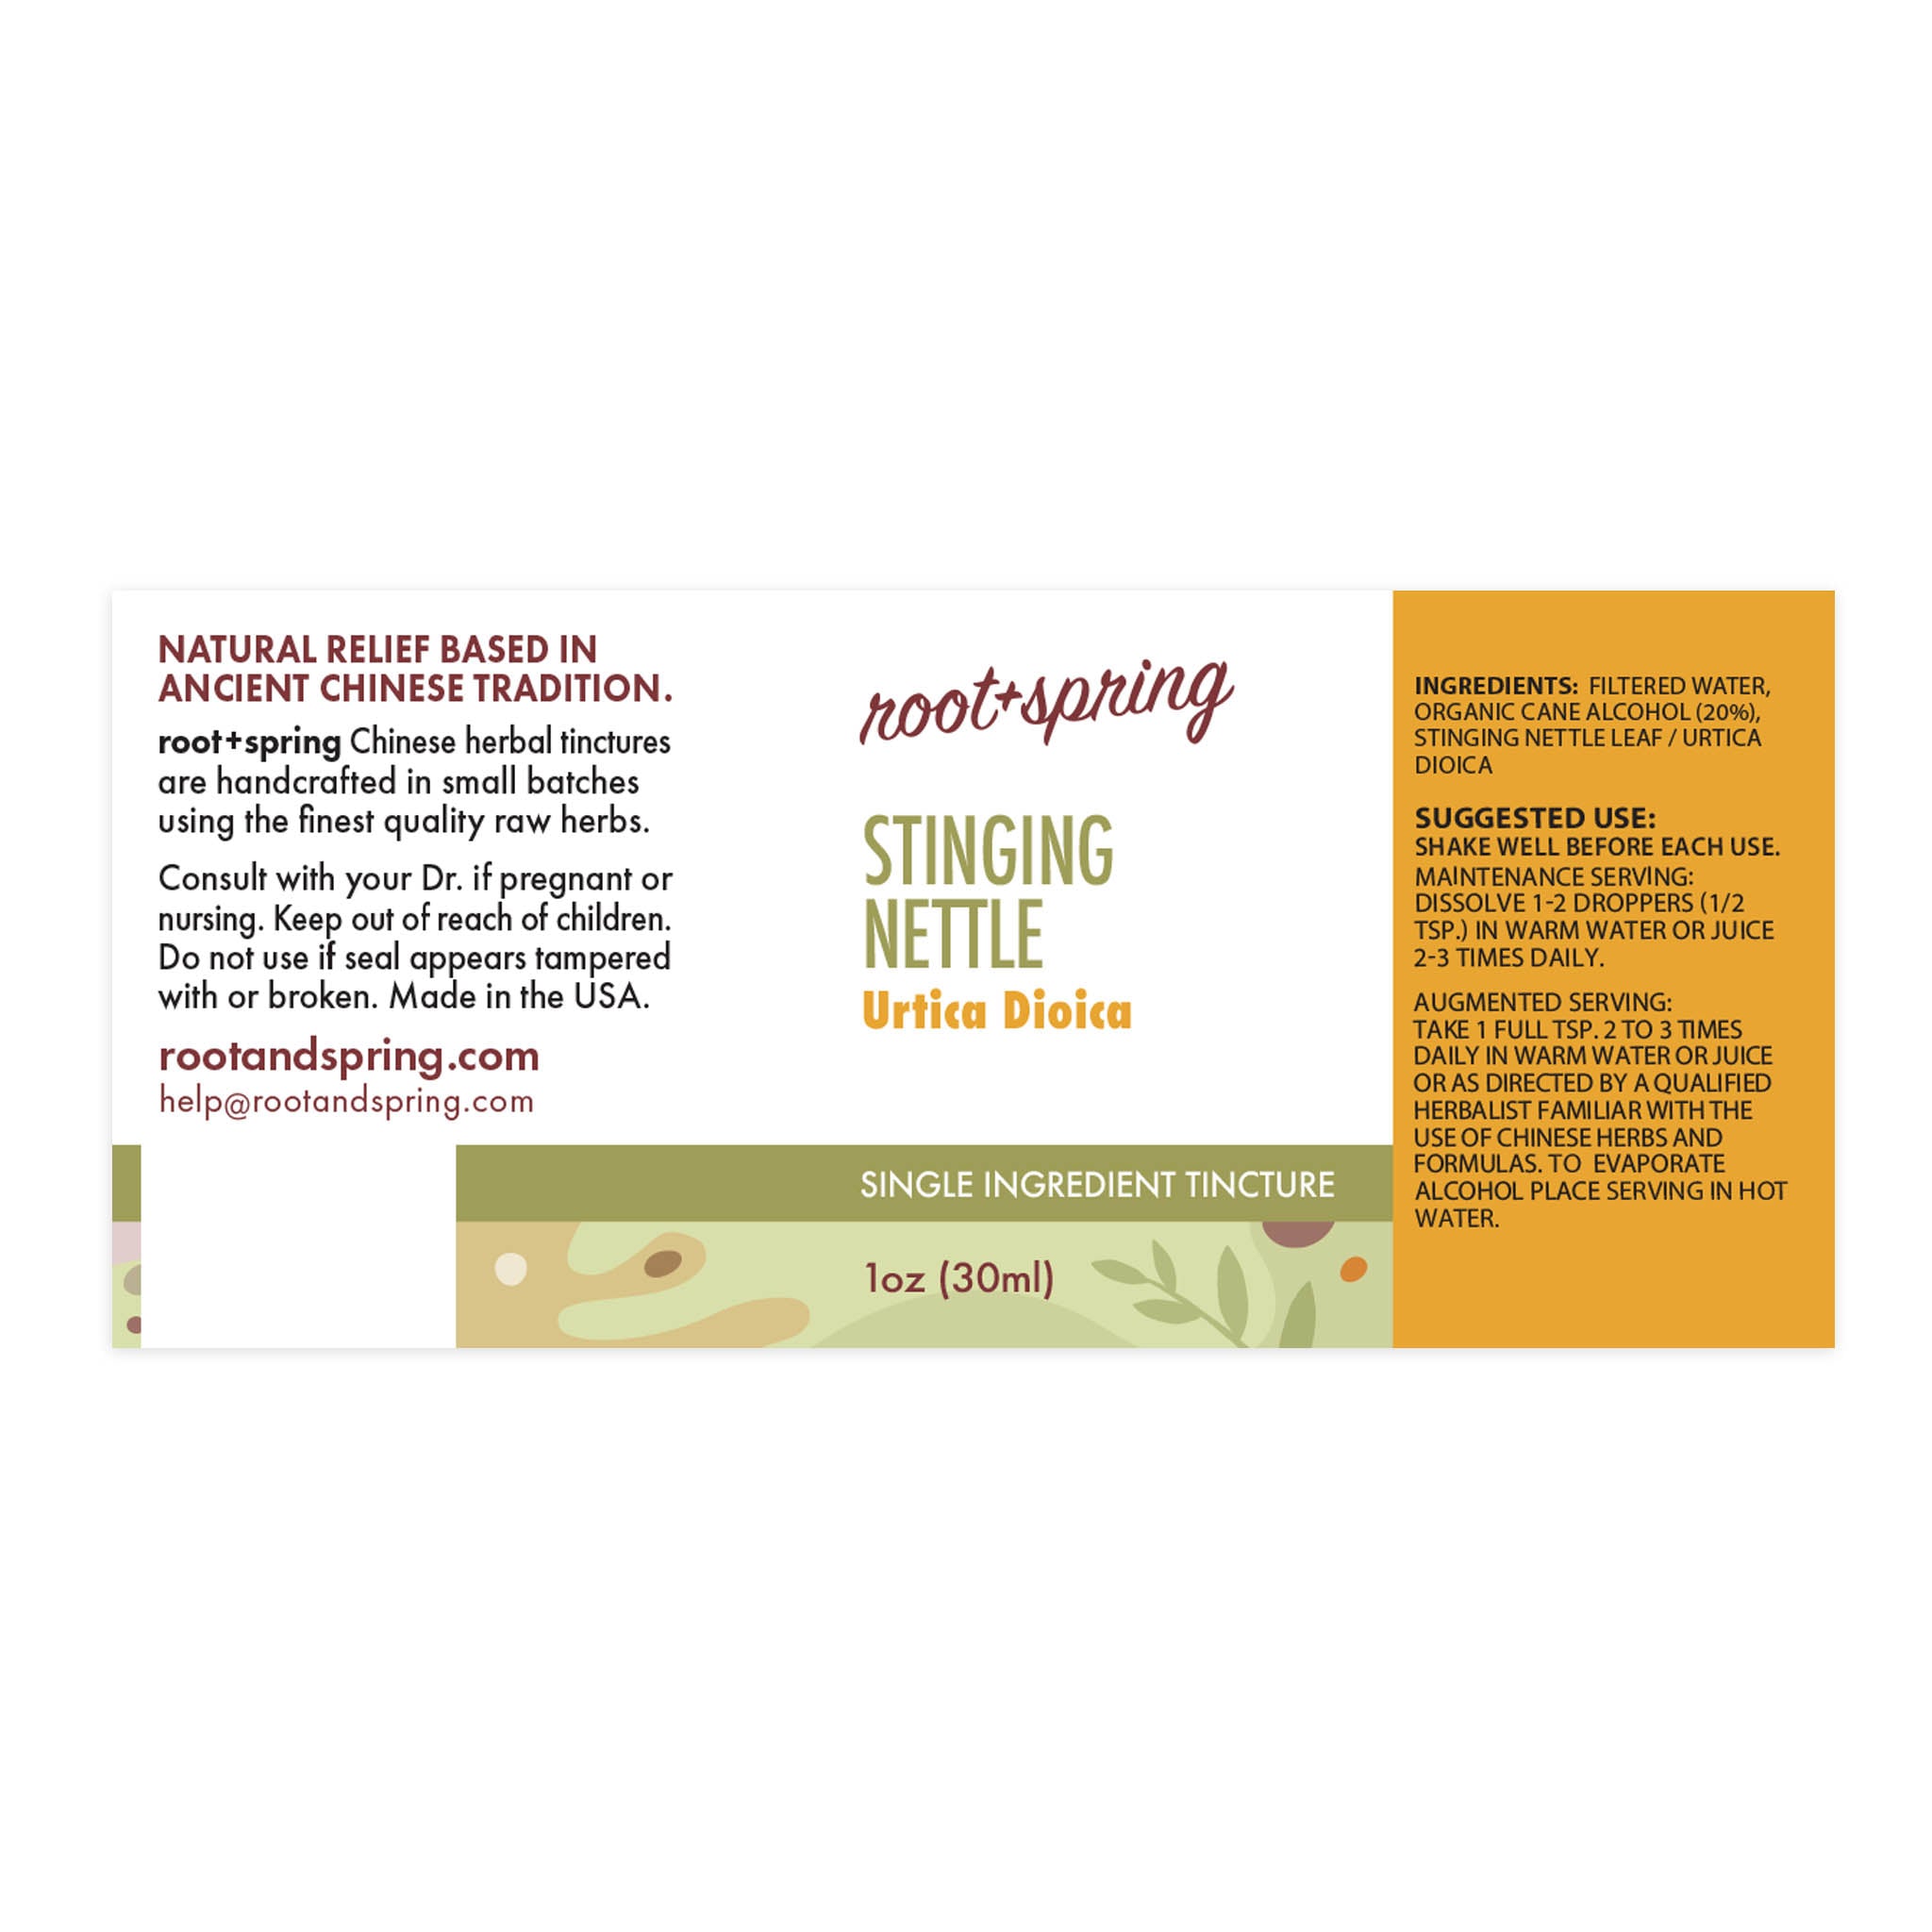 Label of Stinging Nettle (Urtica Dioica) Herbal Tincture by root + spring.